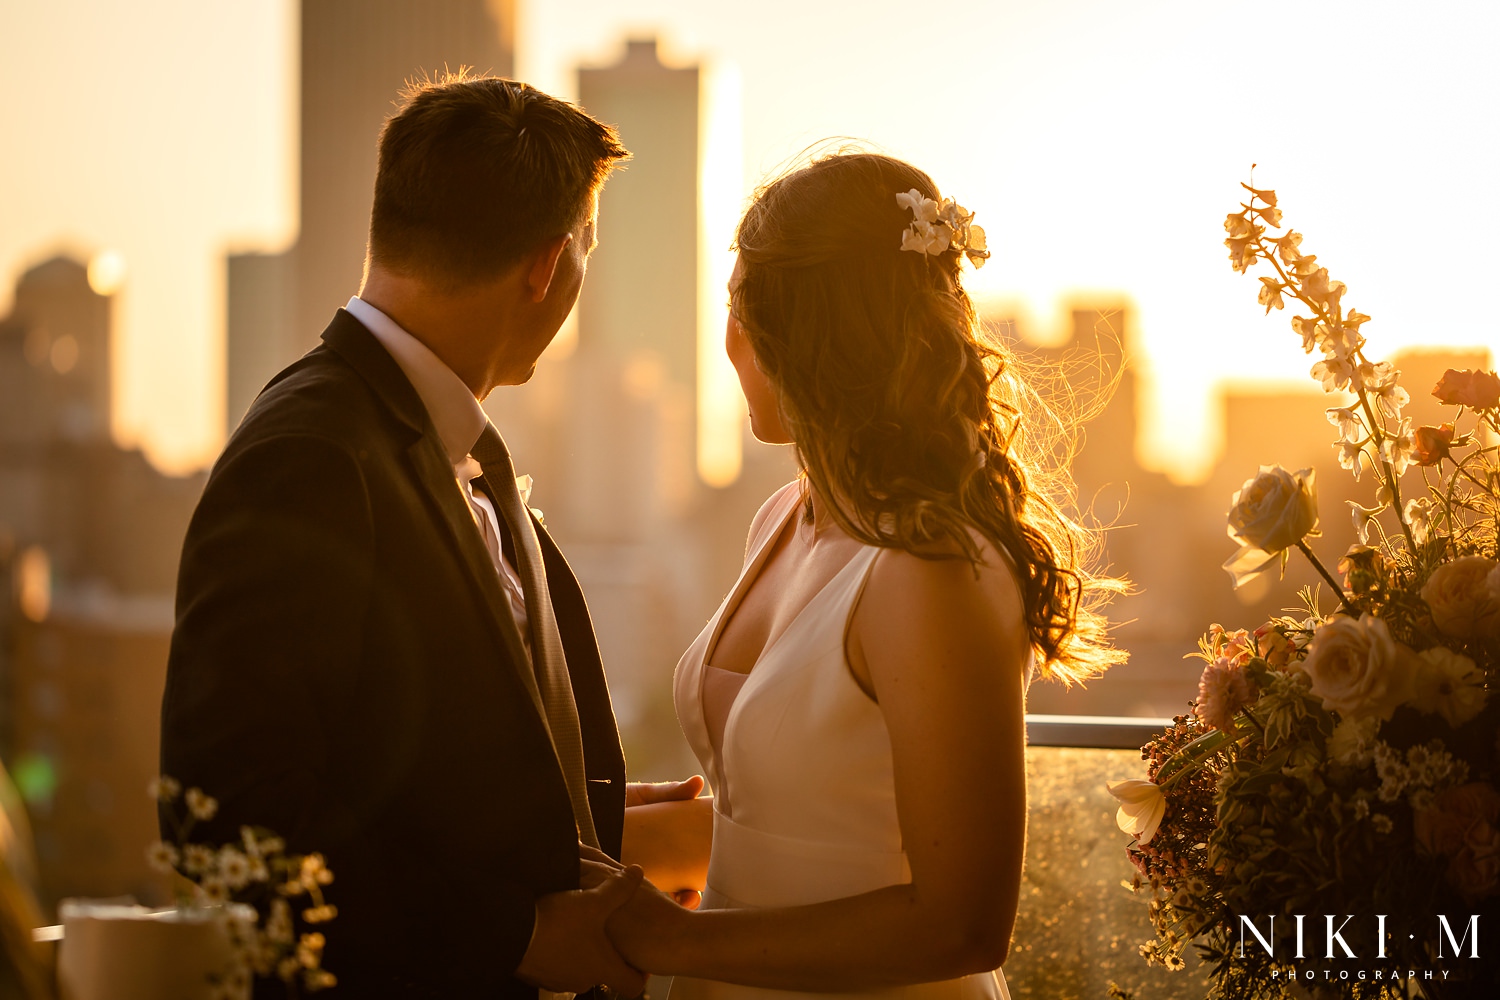 Cake cutting overlooking the inner city skyline at a Johannesburg wedding during sunset